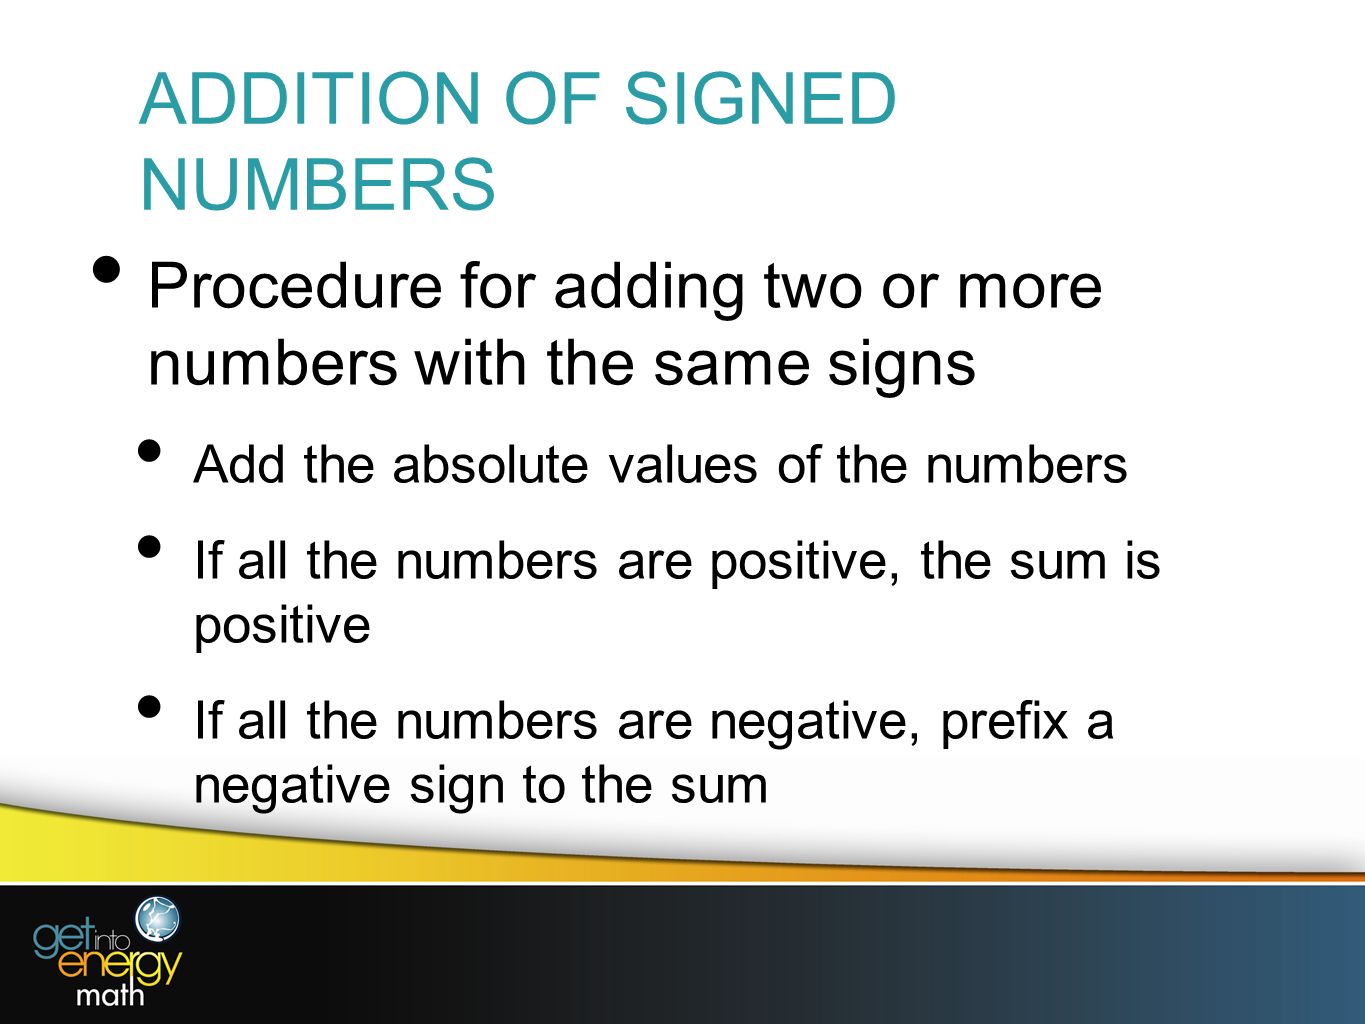 ADDITION OF SIGNED NUMBERS